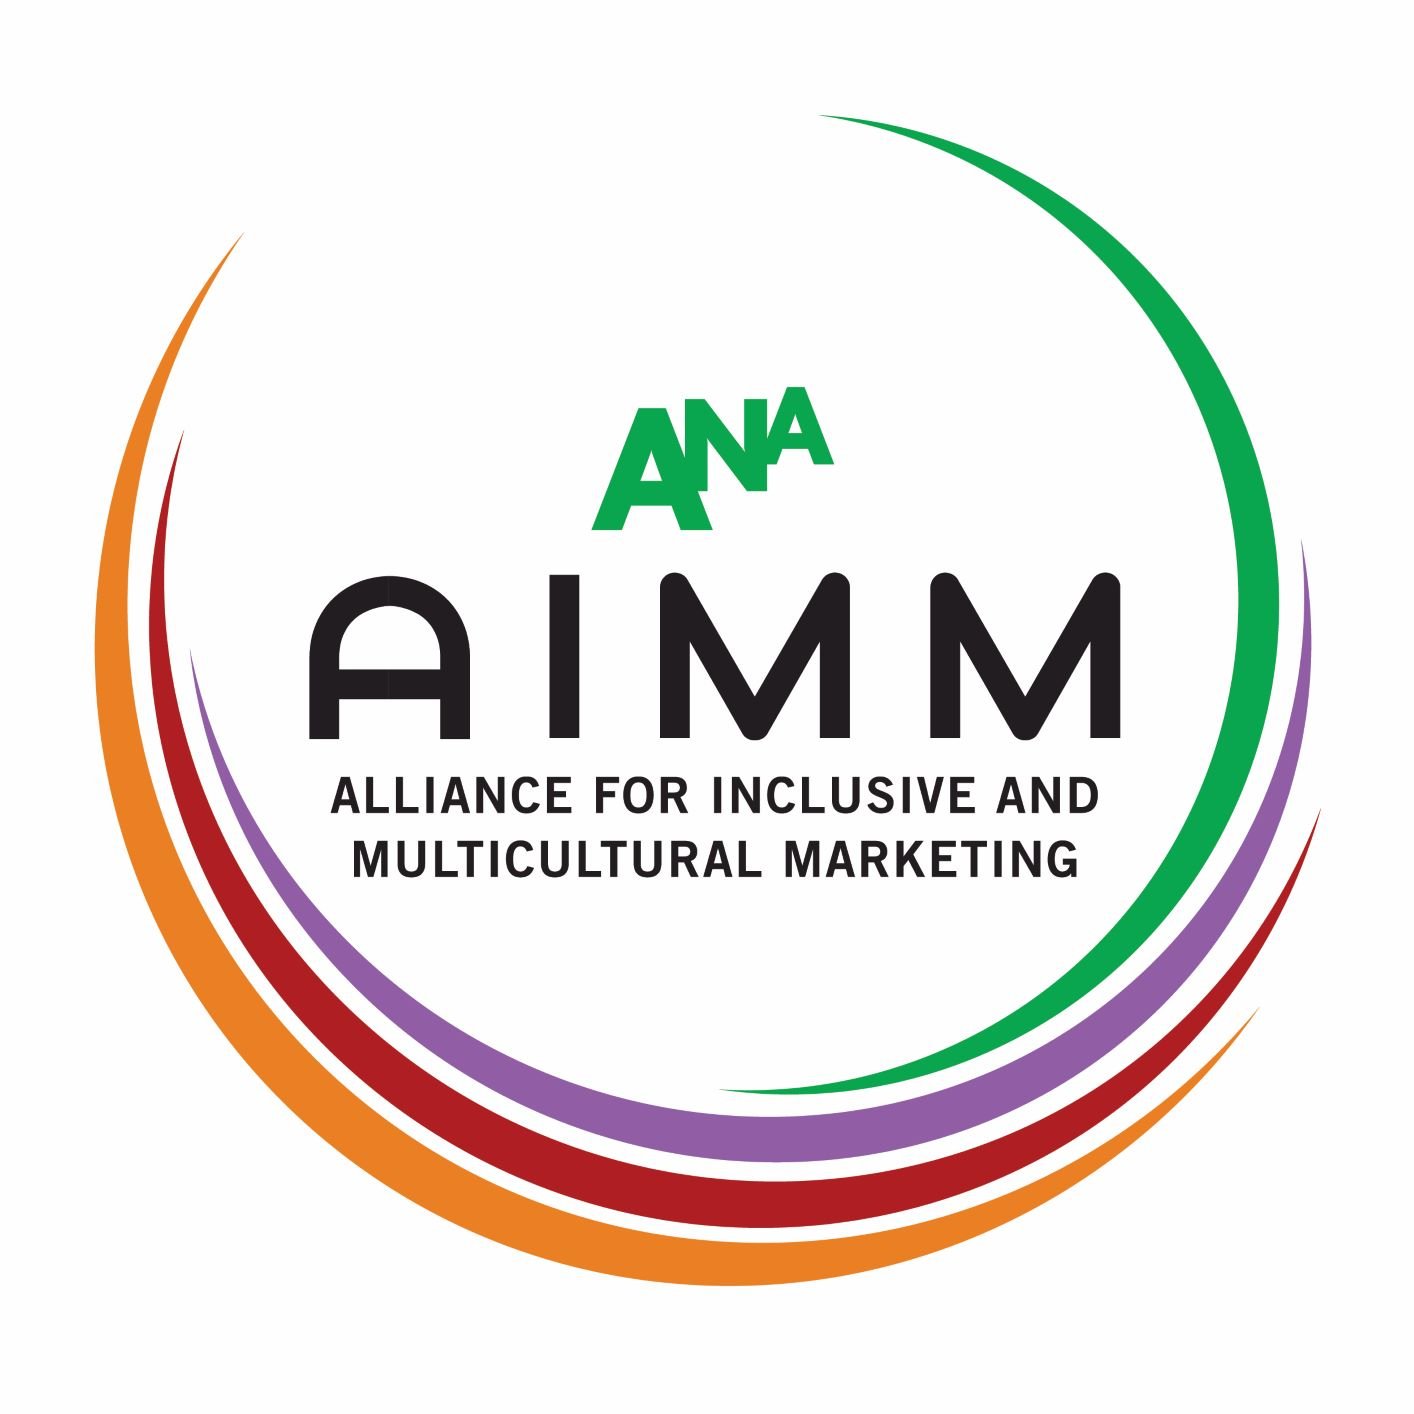 The Alliance for Inclusive and Multicultural Marketing (AIMM) - a branch of the Association of National Advertisers (ANA).